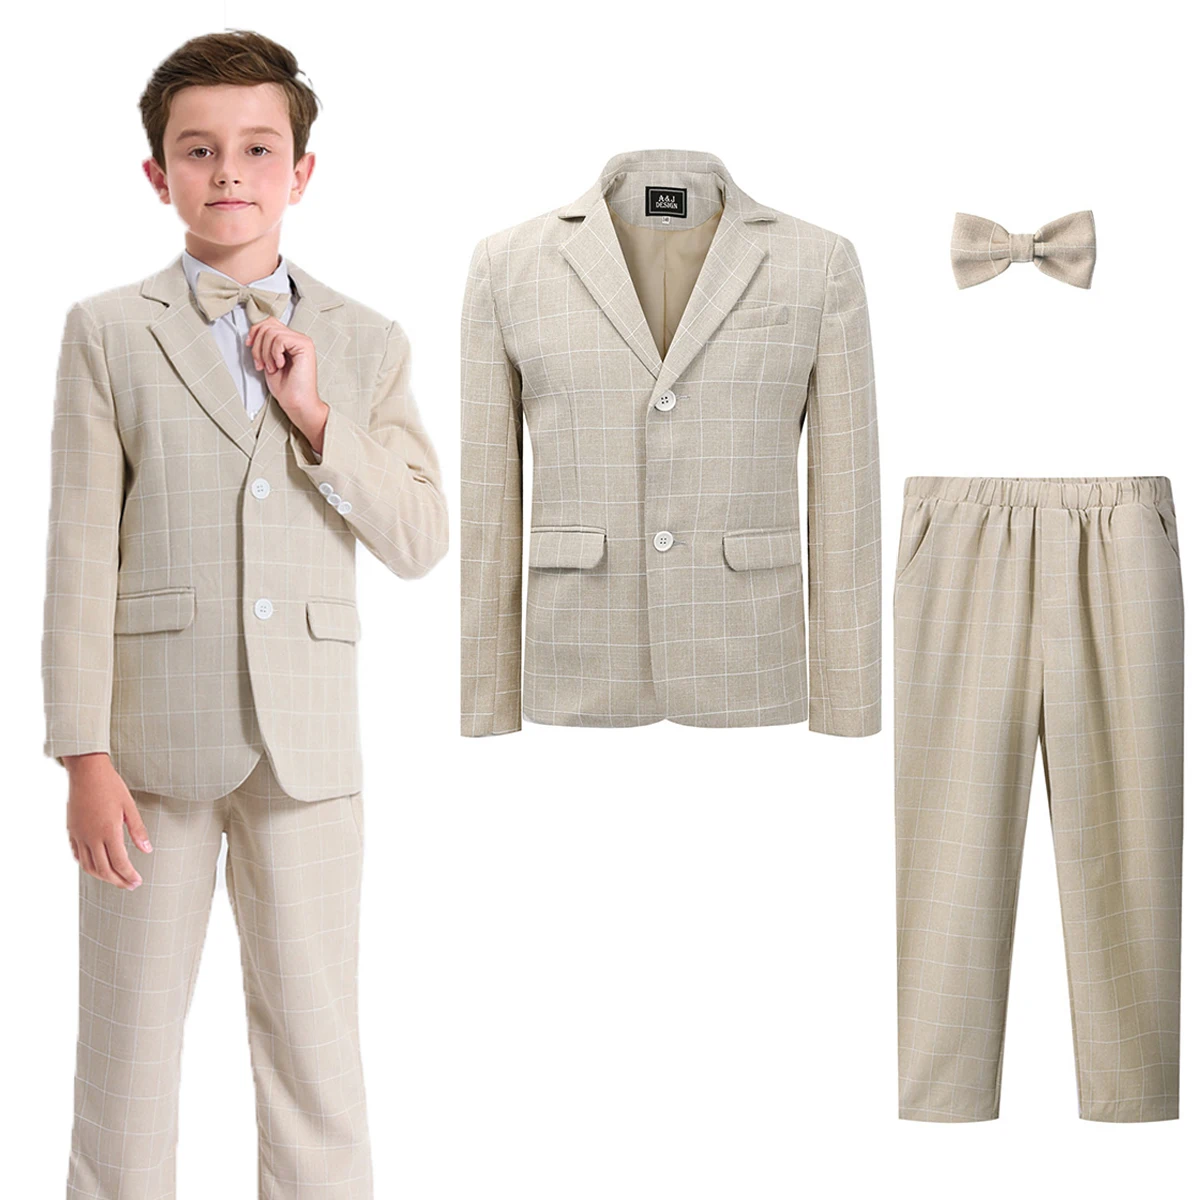 Khaki Suit for Boys Easter Outfits Set Kid Blazer Wedding Clothes Teenager Plaid Formal Tuxedo Flower Party Performance Costume